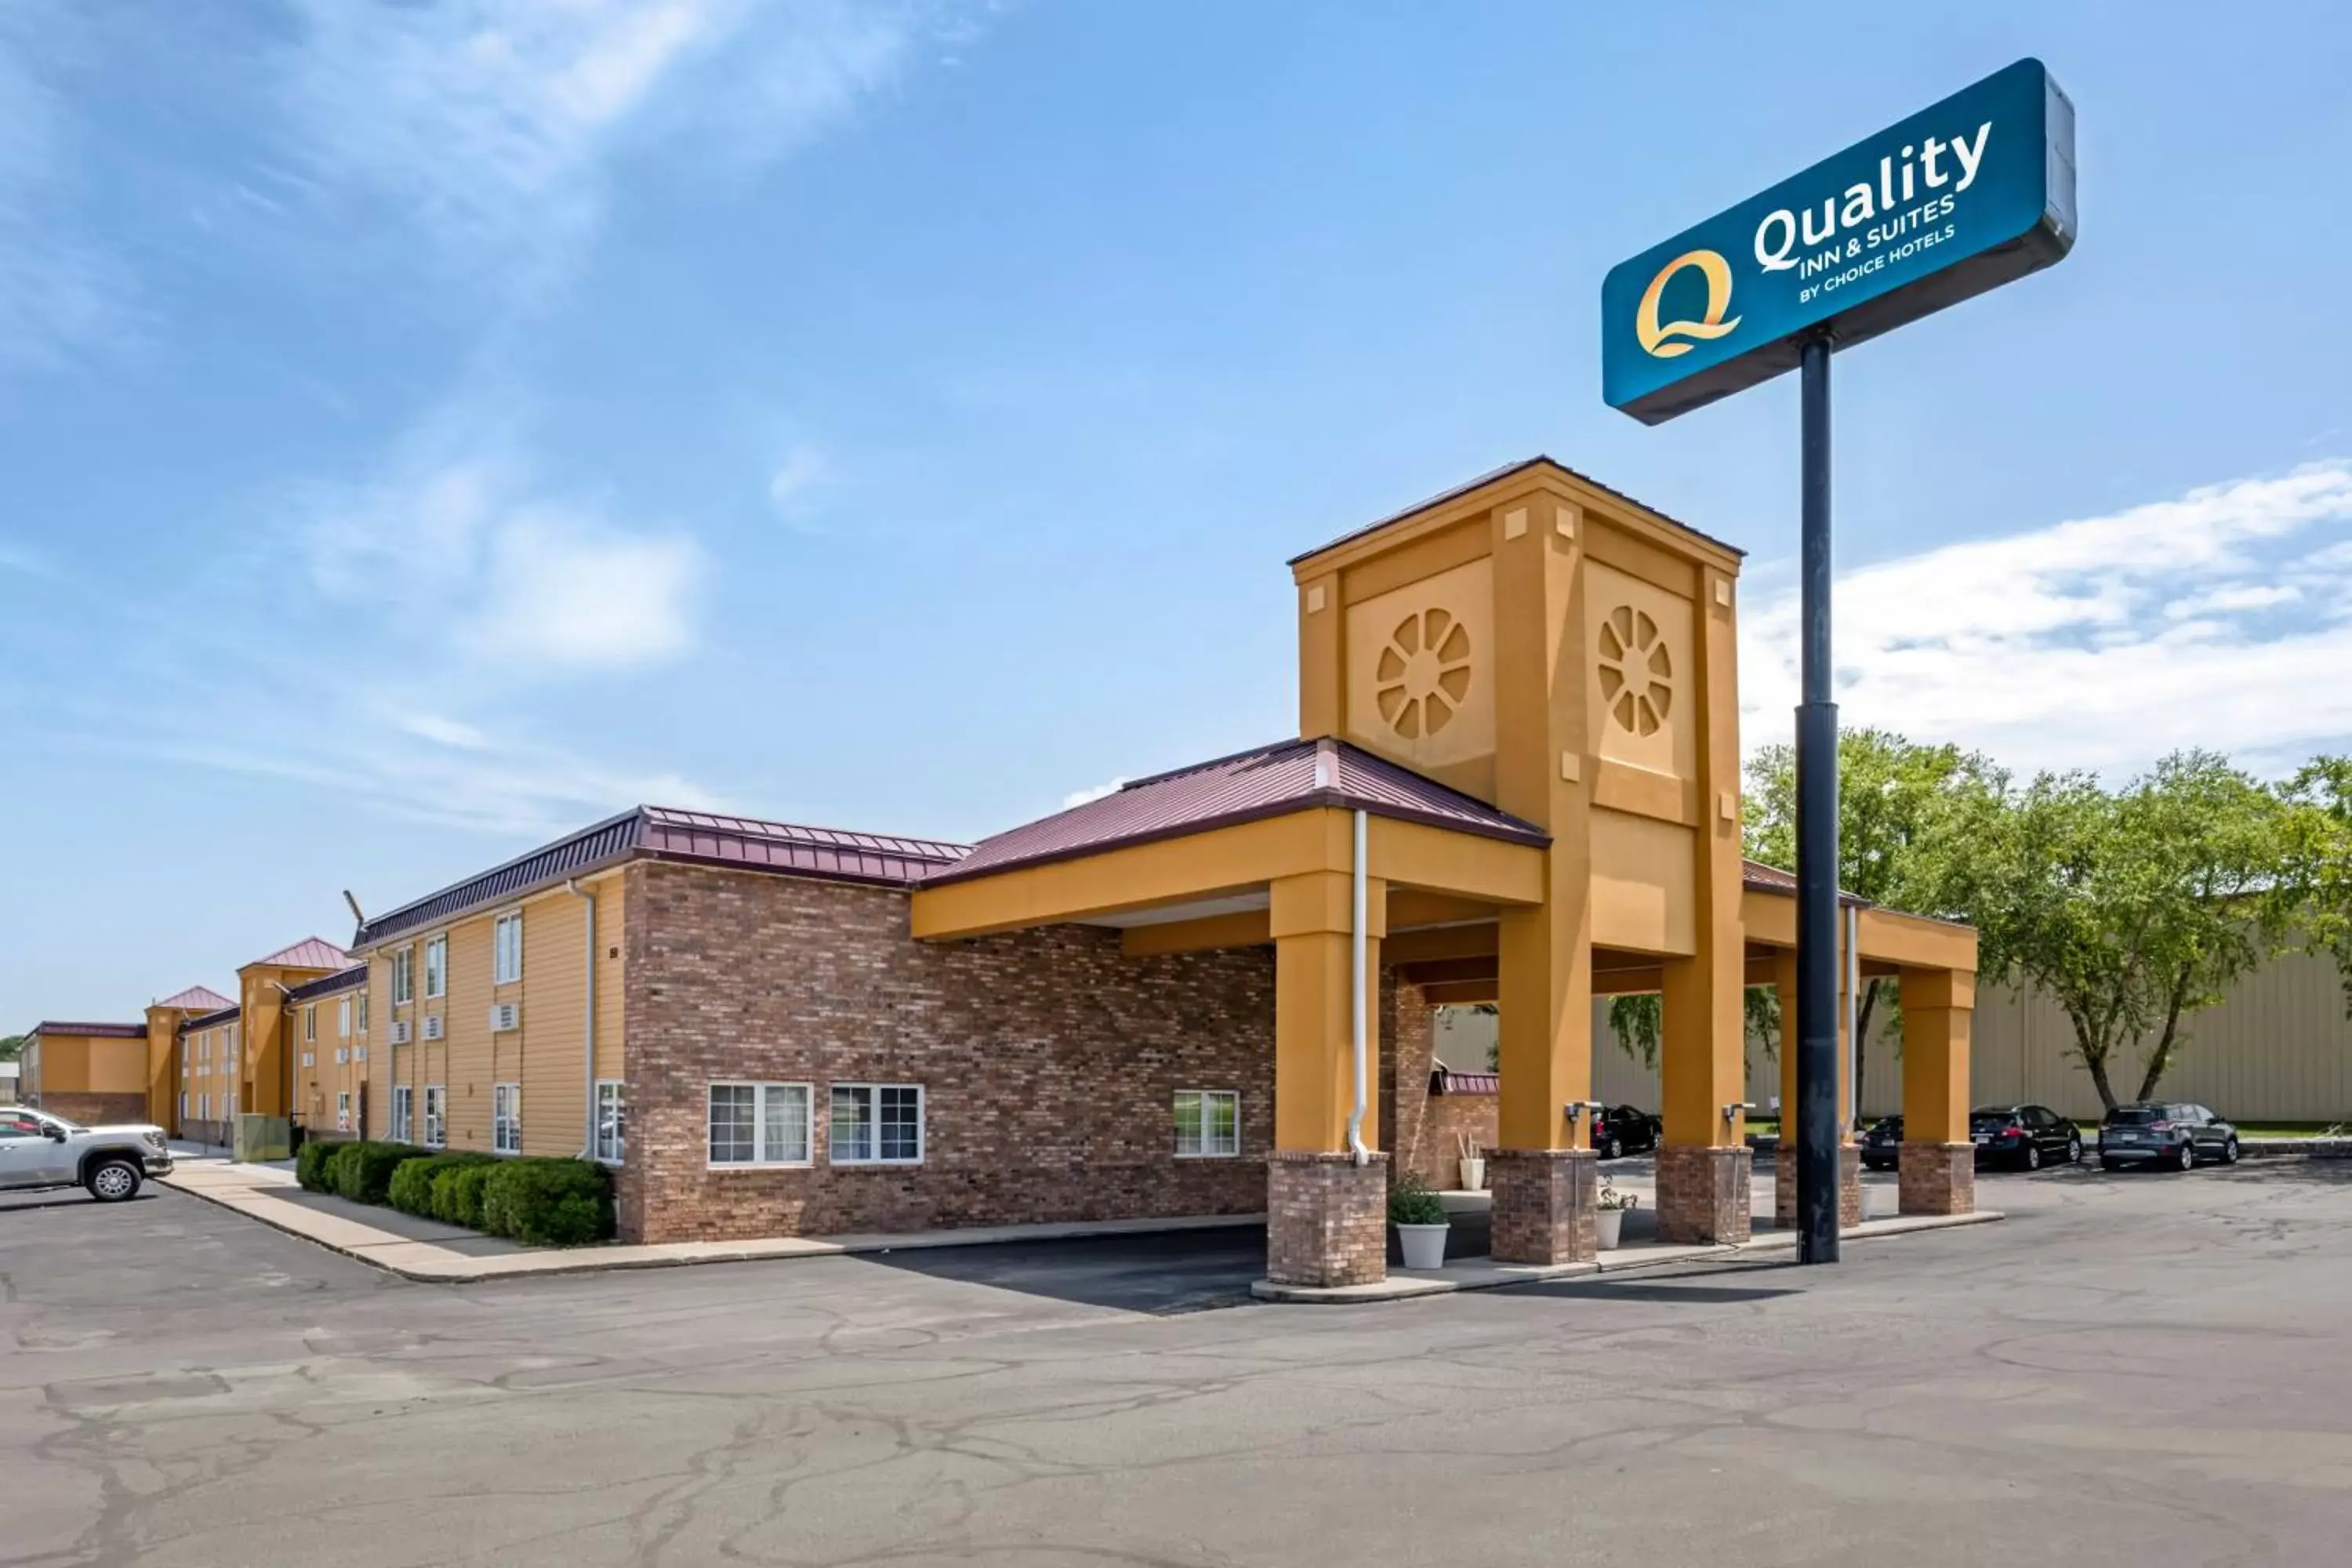 Property Building in Quality Inn and Suites Lincoln